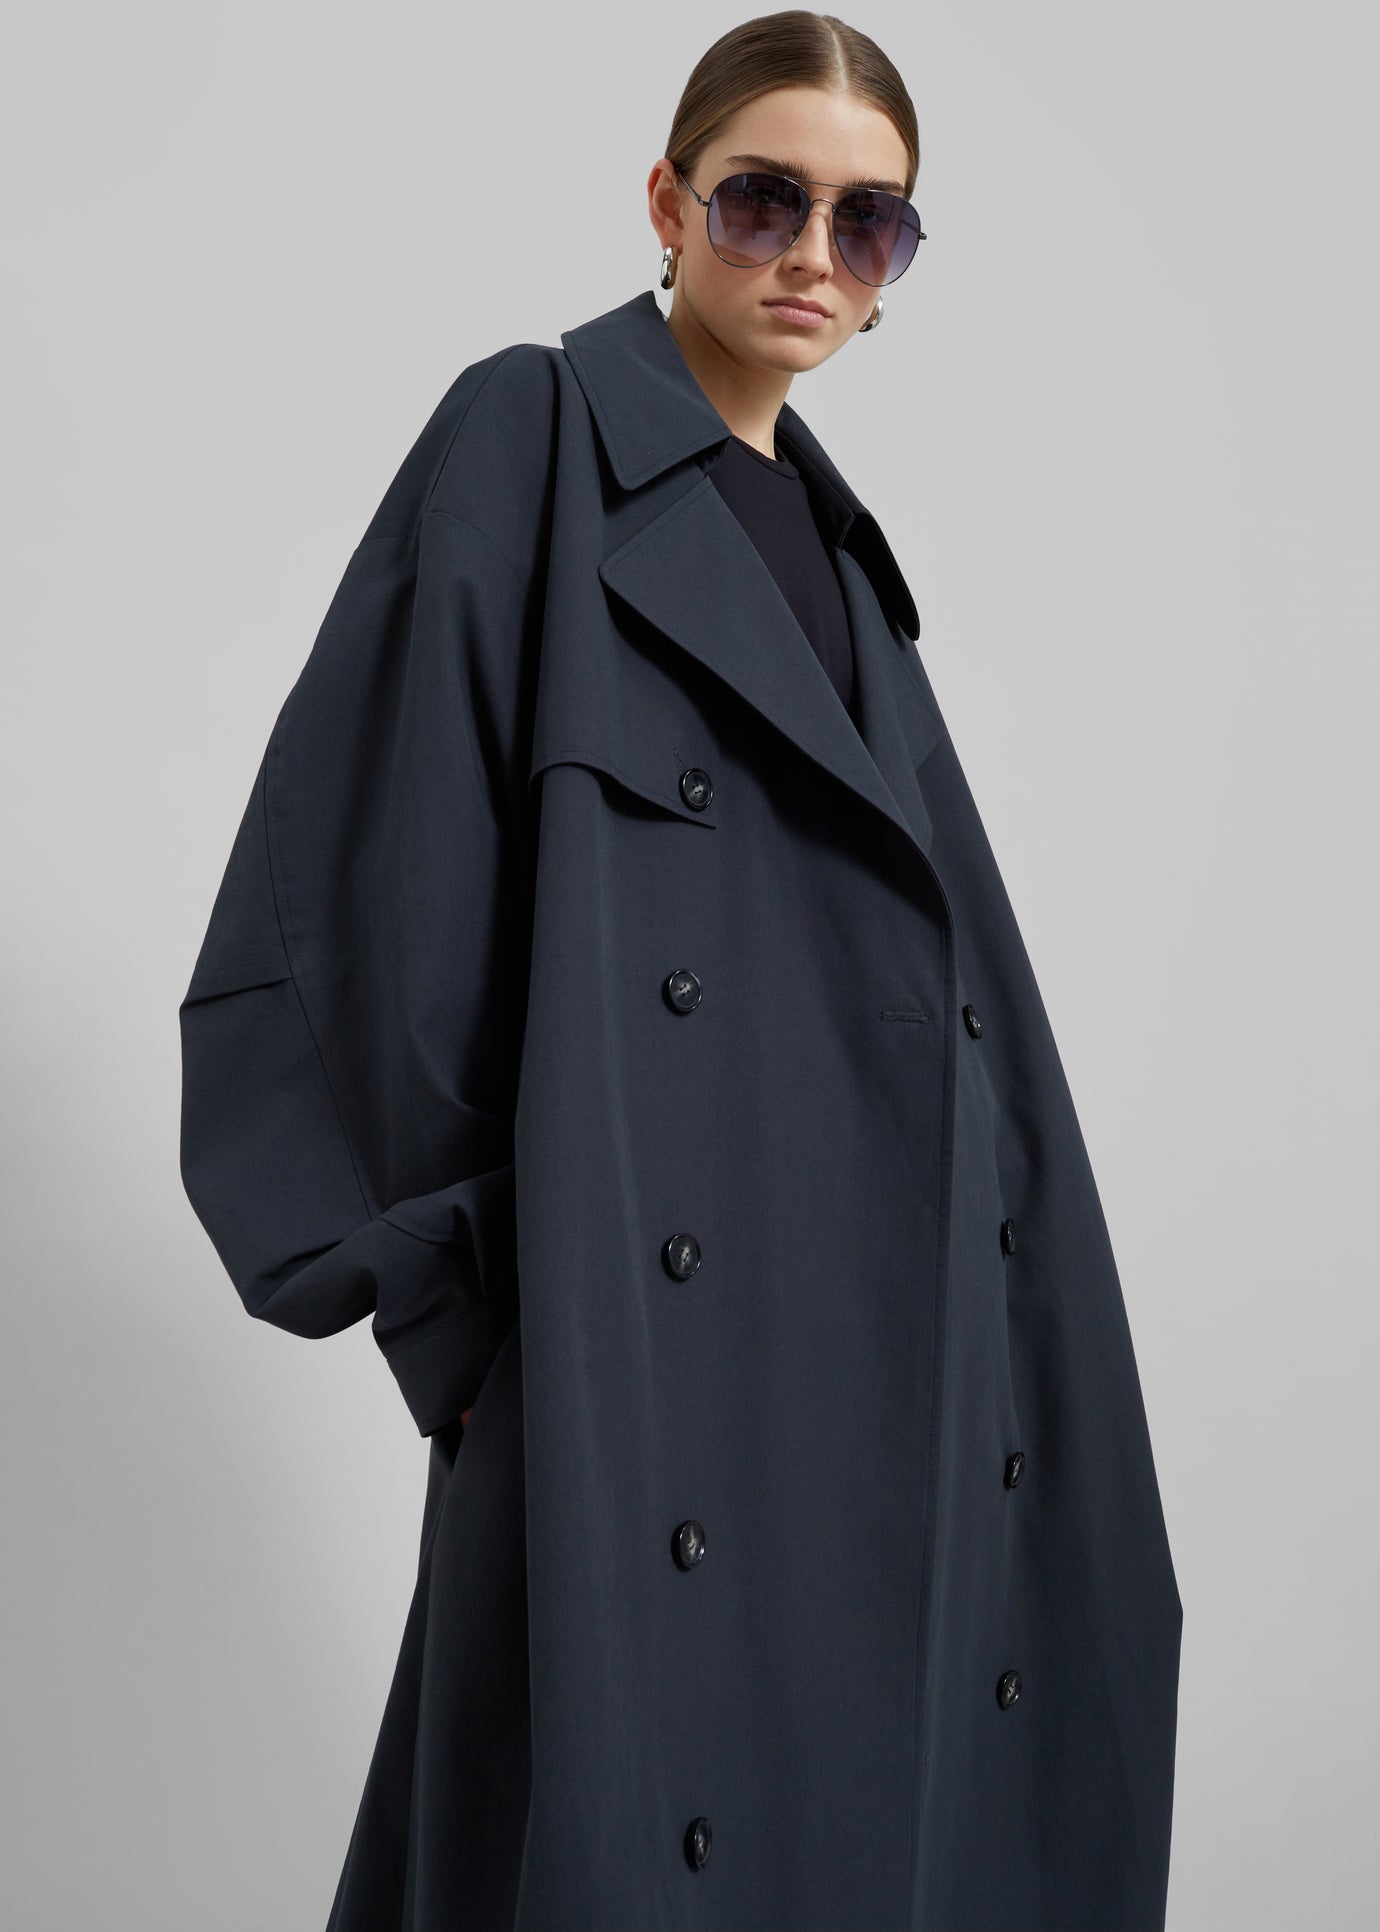 Anika Double Breasted Trench Coat - Navy - 1